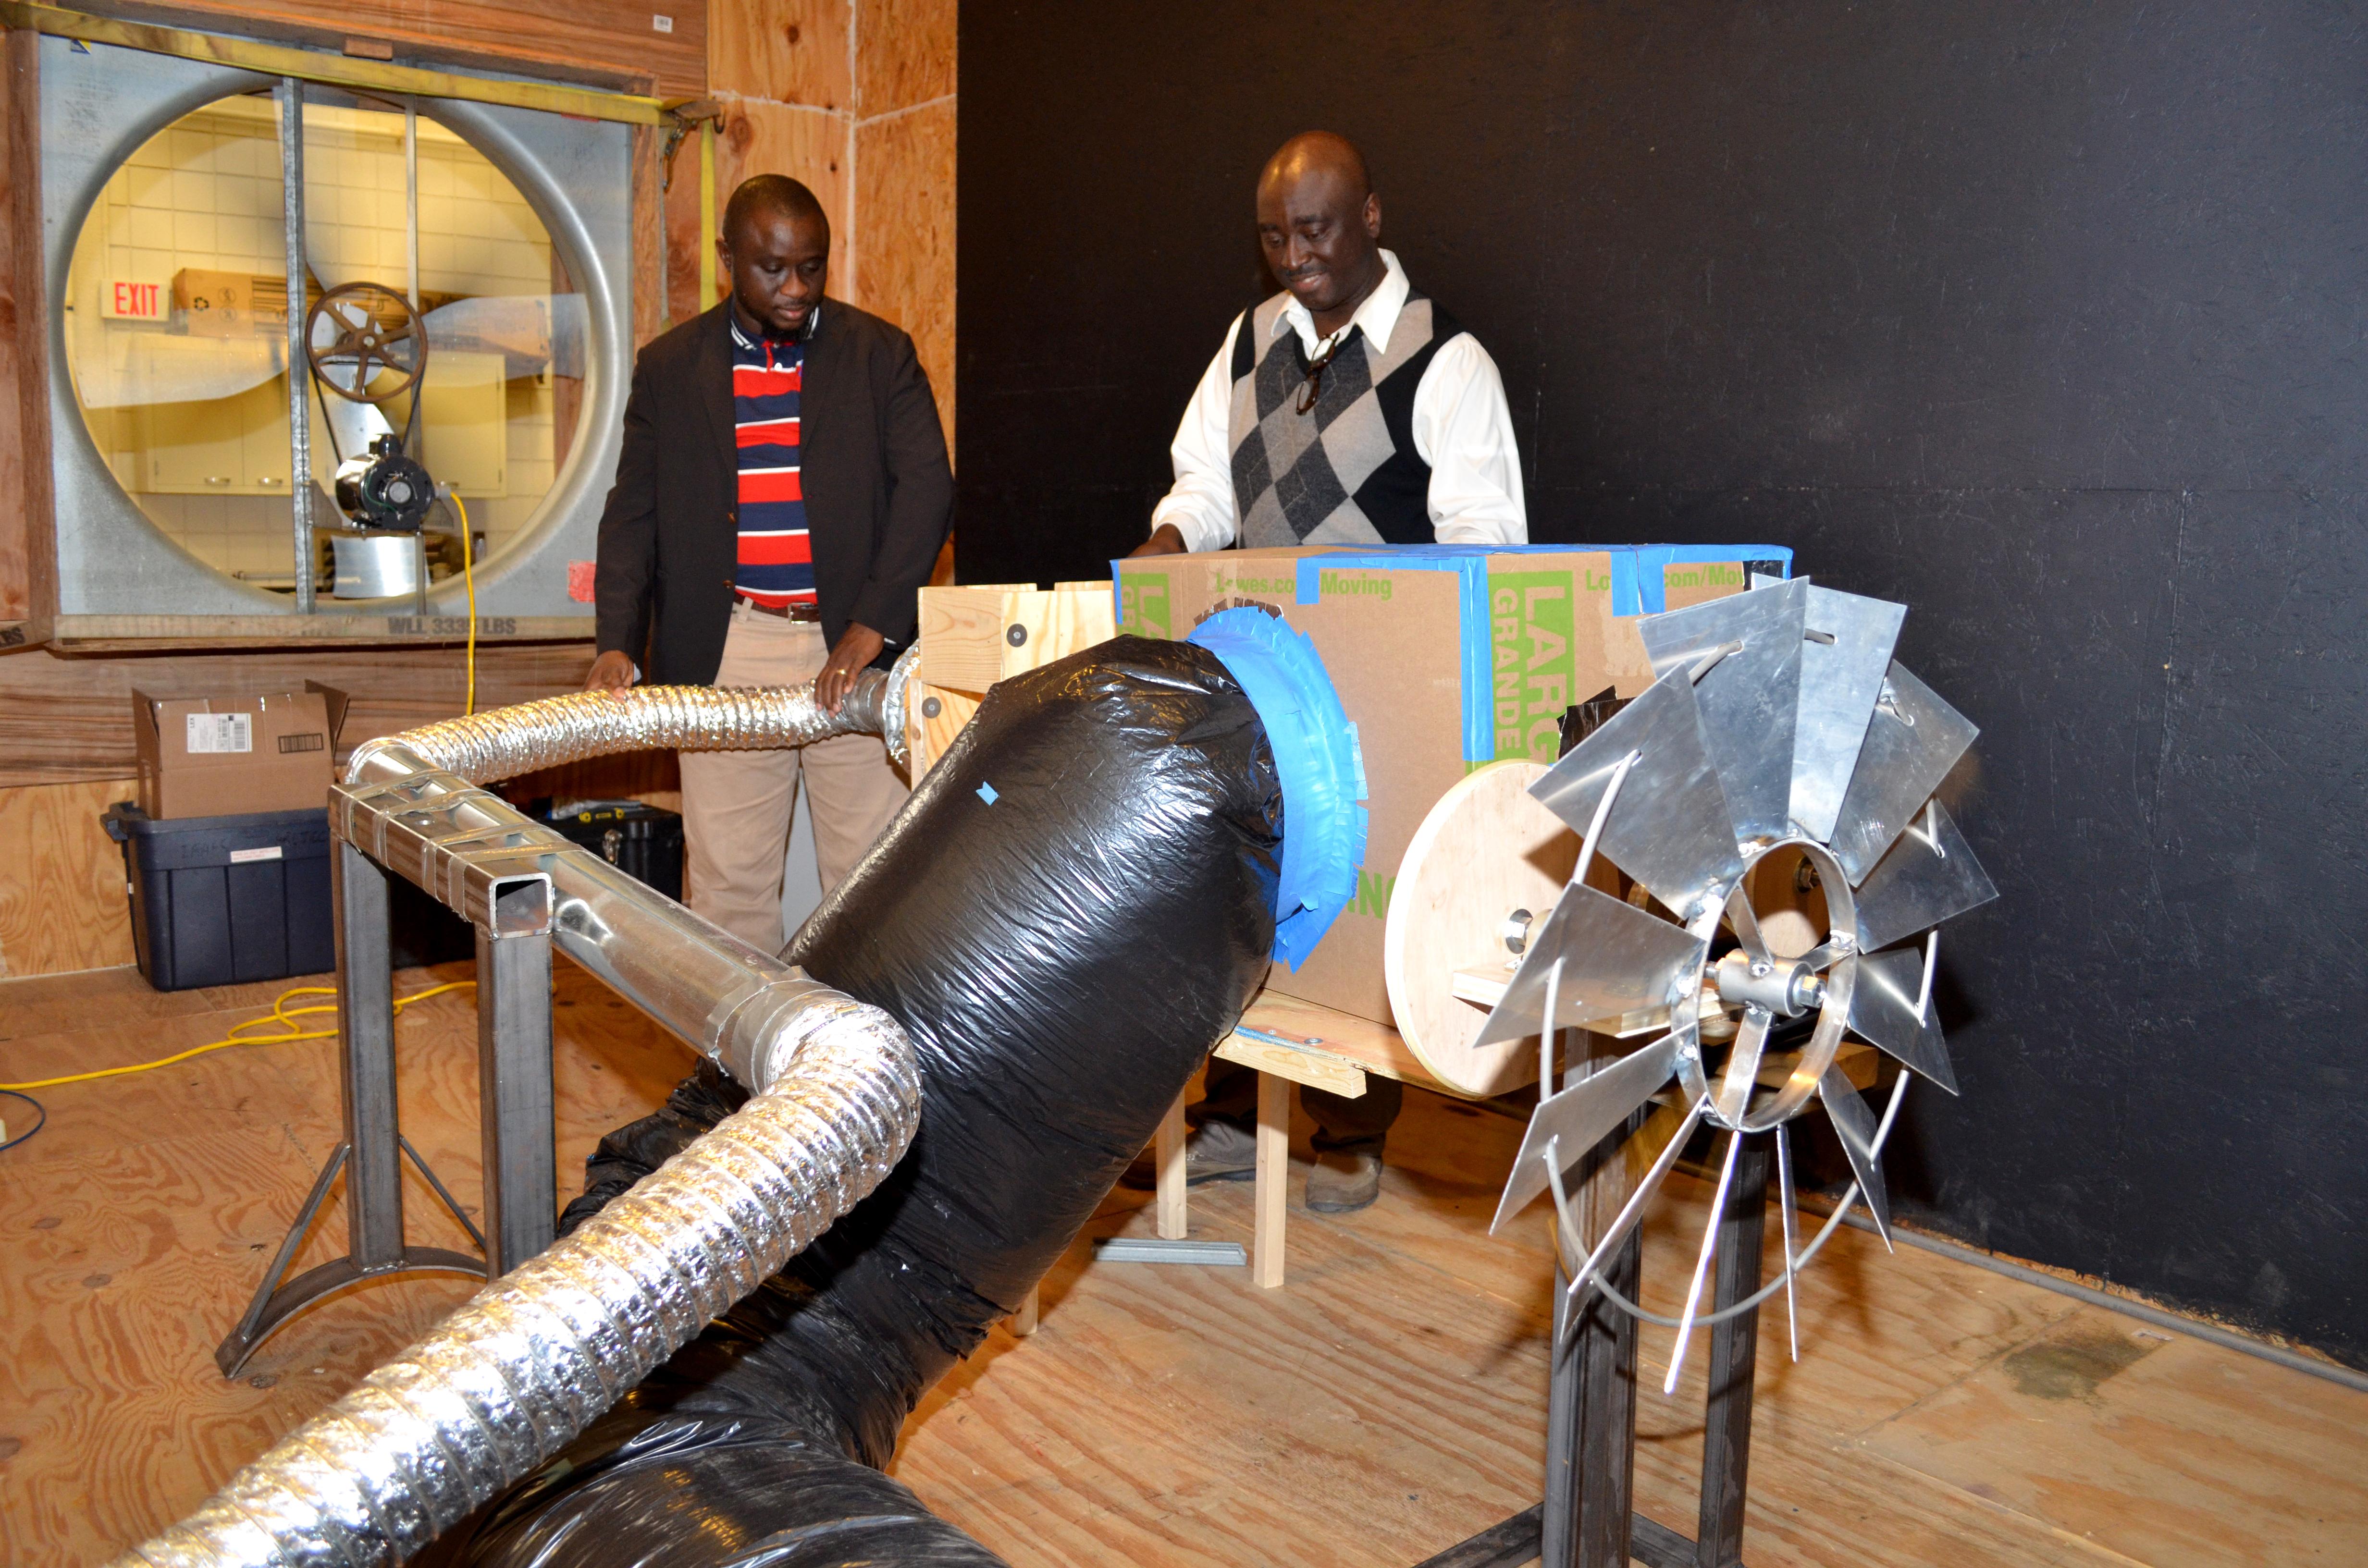 UK assistant professor Akinbode Adedeji and UK doctoral student Francis Agbali look over the wind turbine and grain drying system they developed.